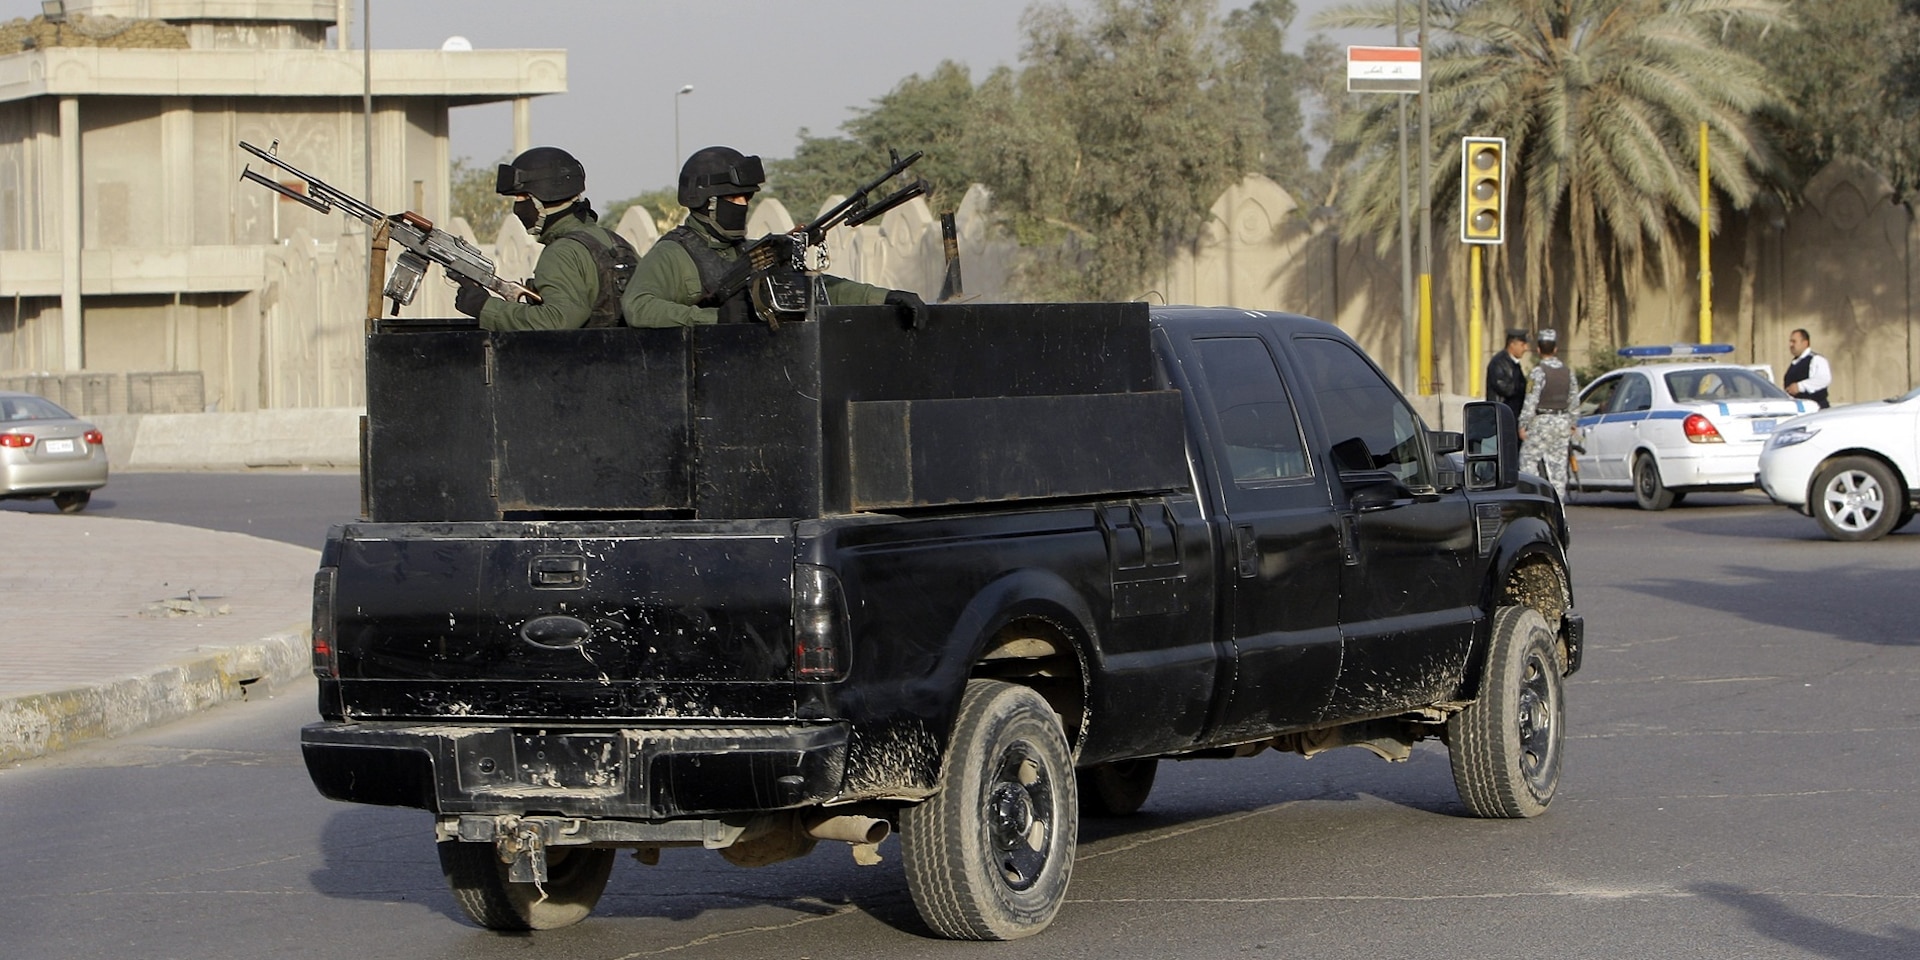 Two masked soldiers from a private security company stand armed to the teeth in the back of a black pick-up truck.